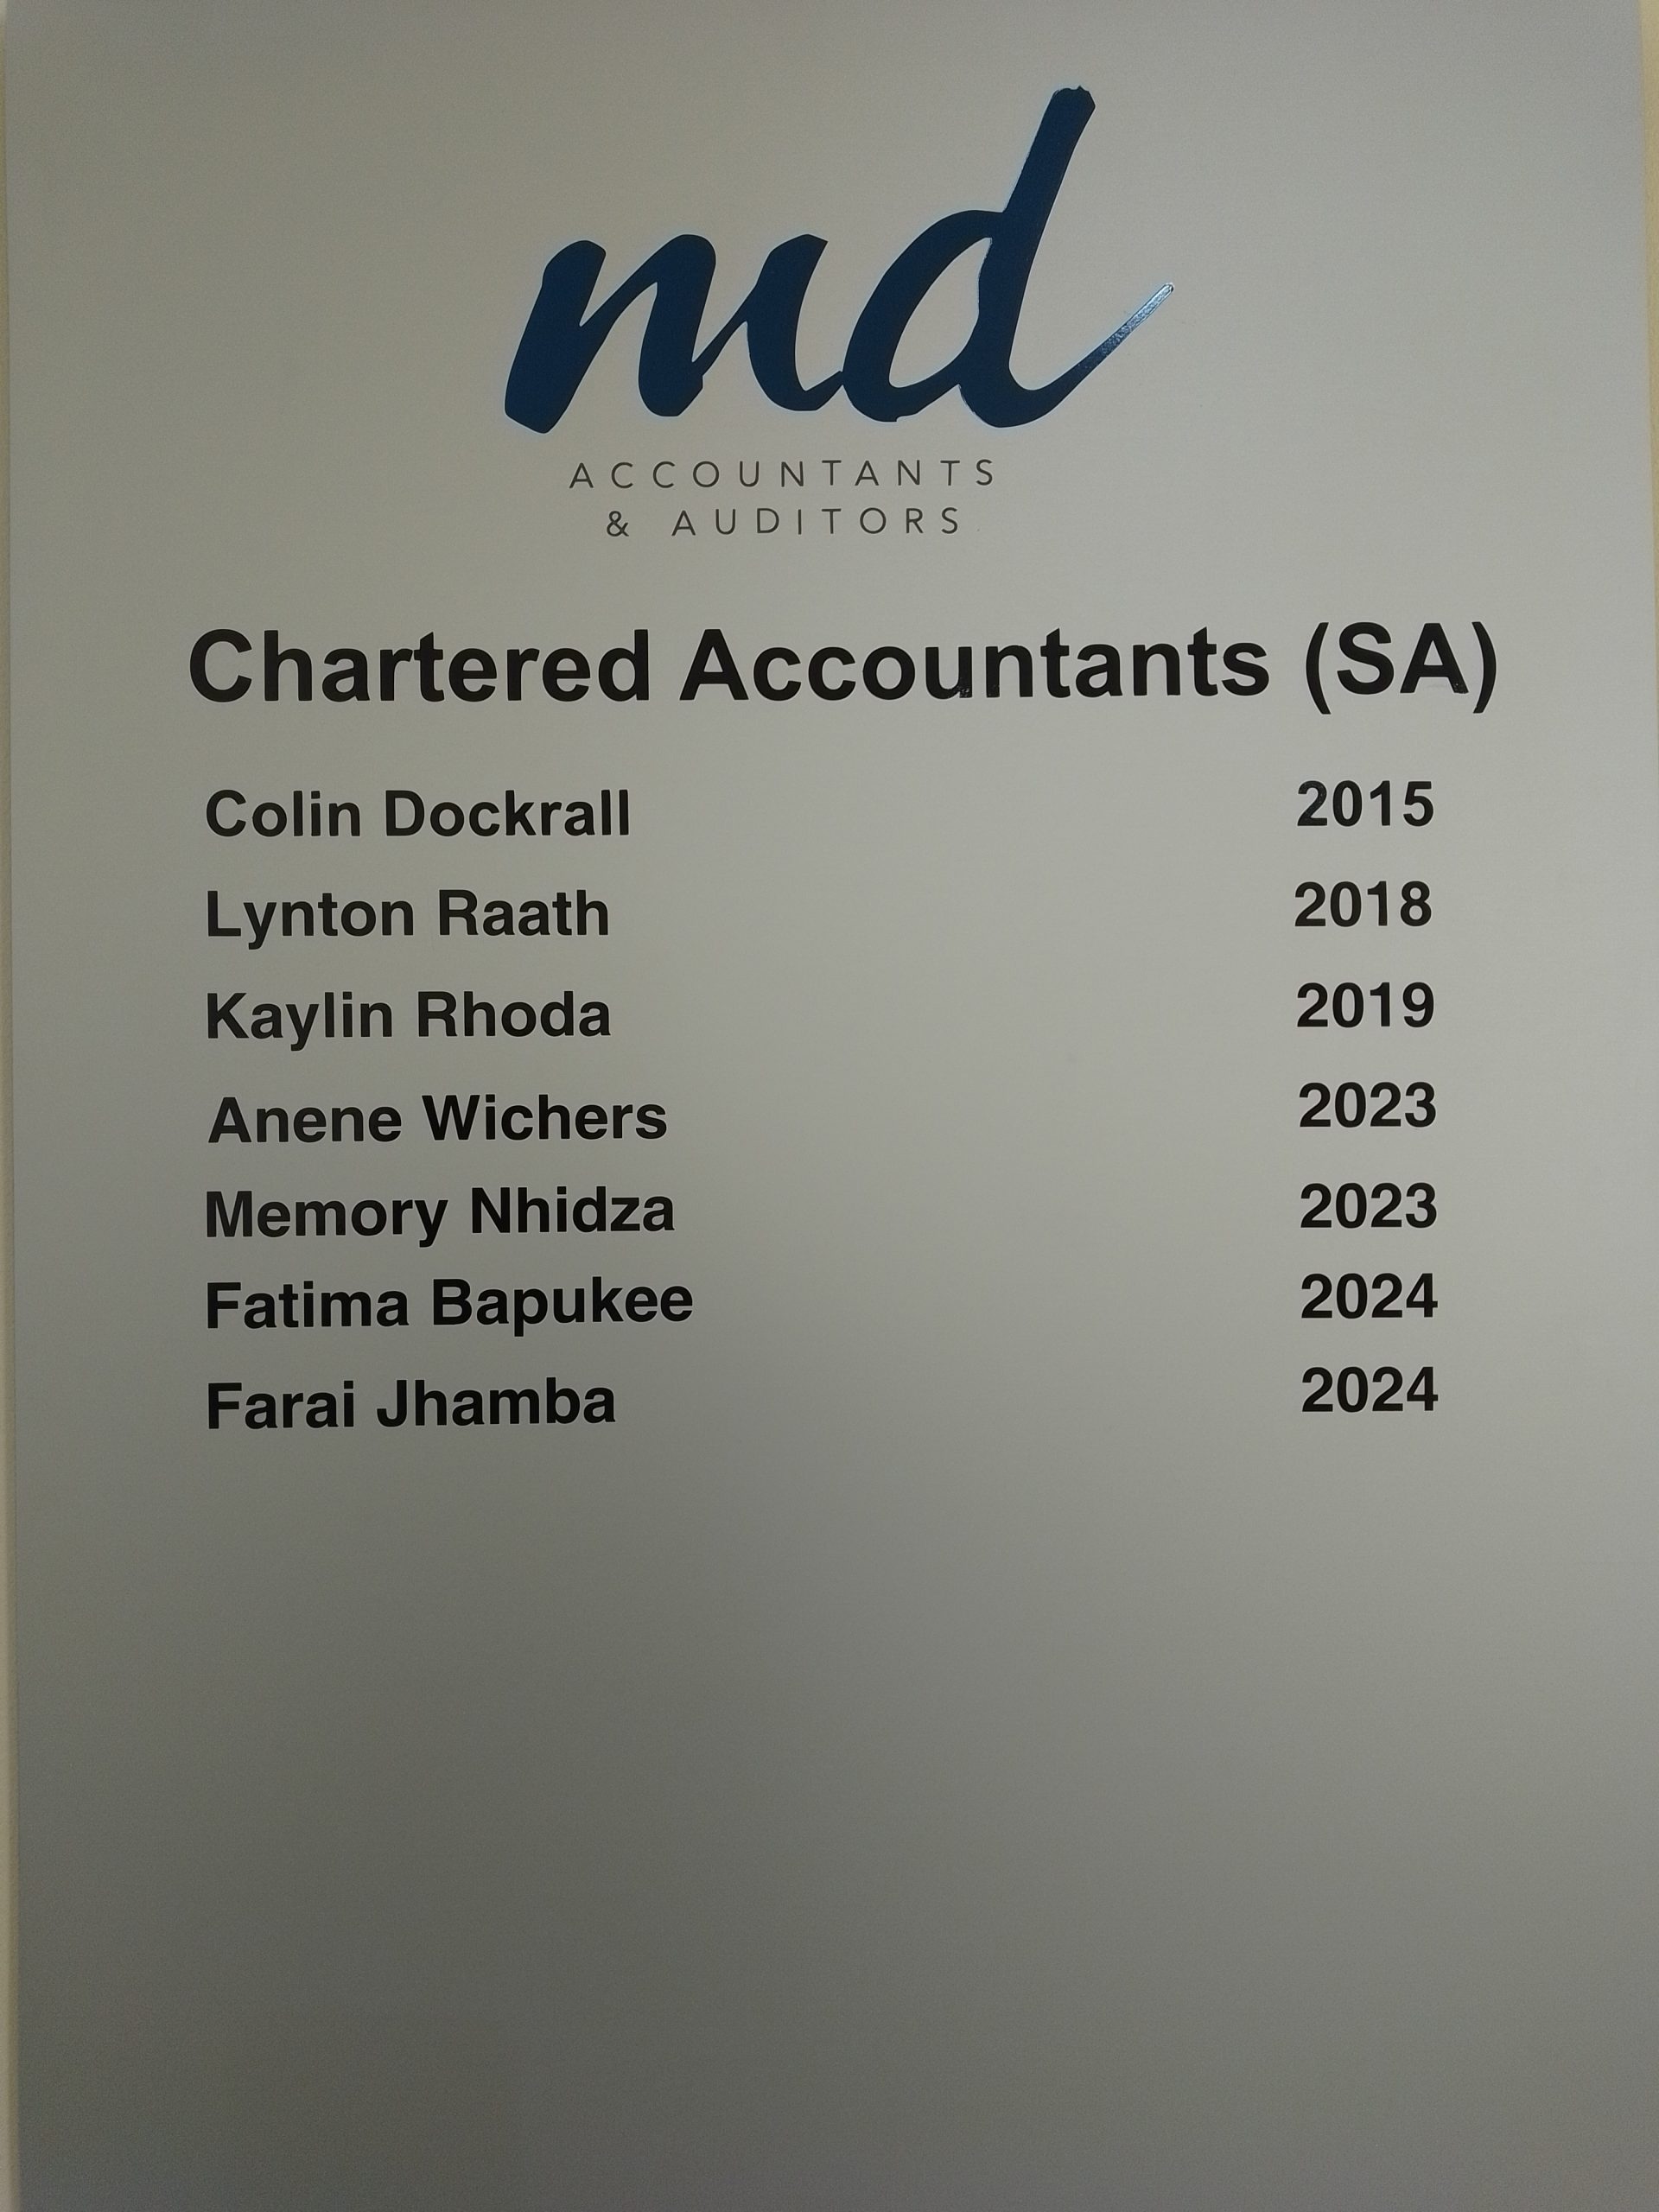 We are so proud of our recently qualified Chartered Accountants